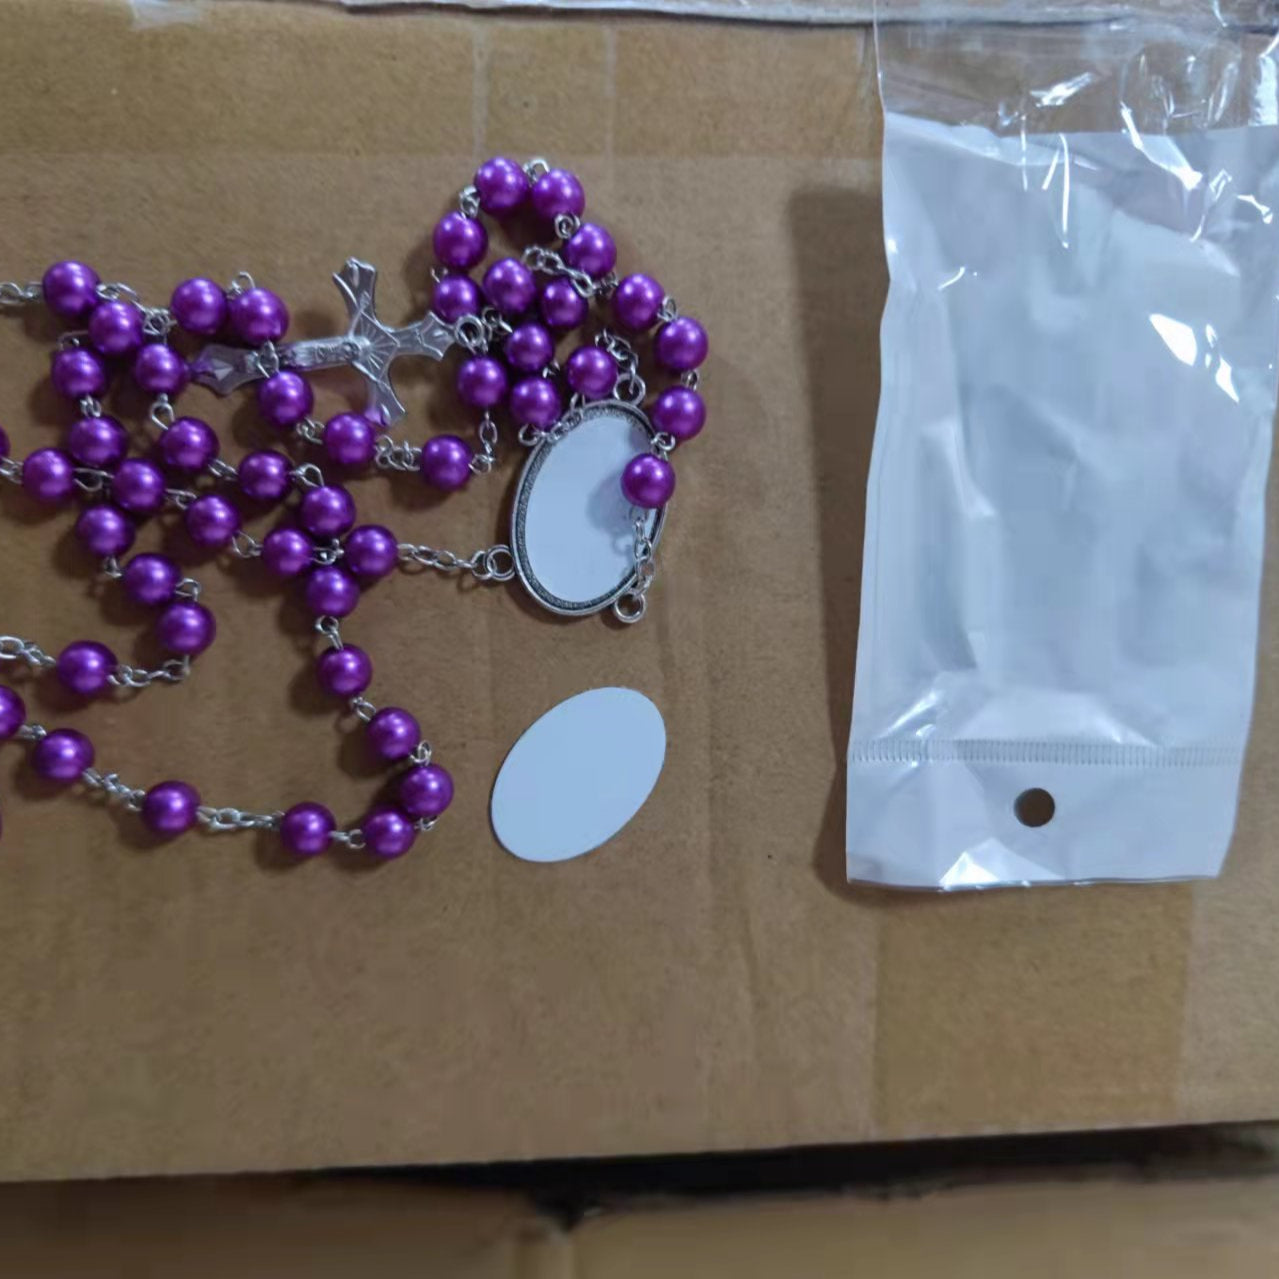 sublimation blank pearl like rosary necklace 59 beads in stock,8 colors in option - SP Sublimation